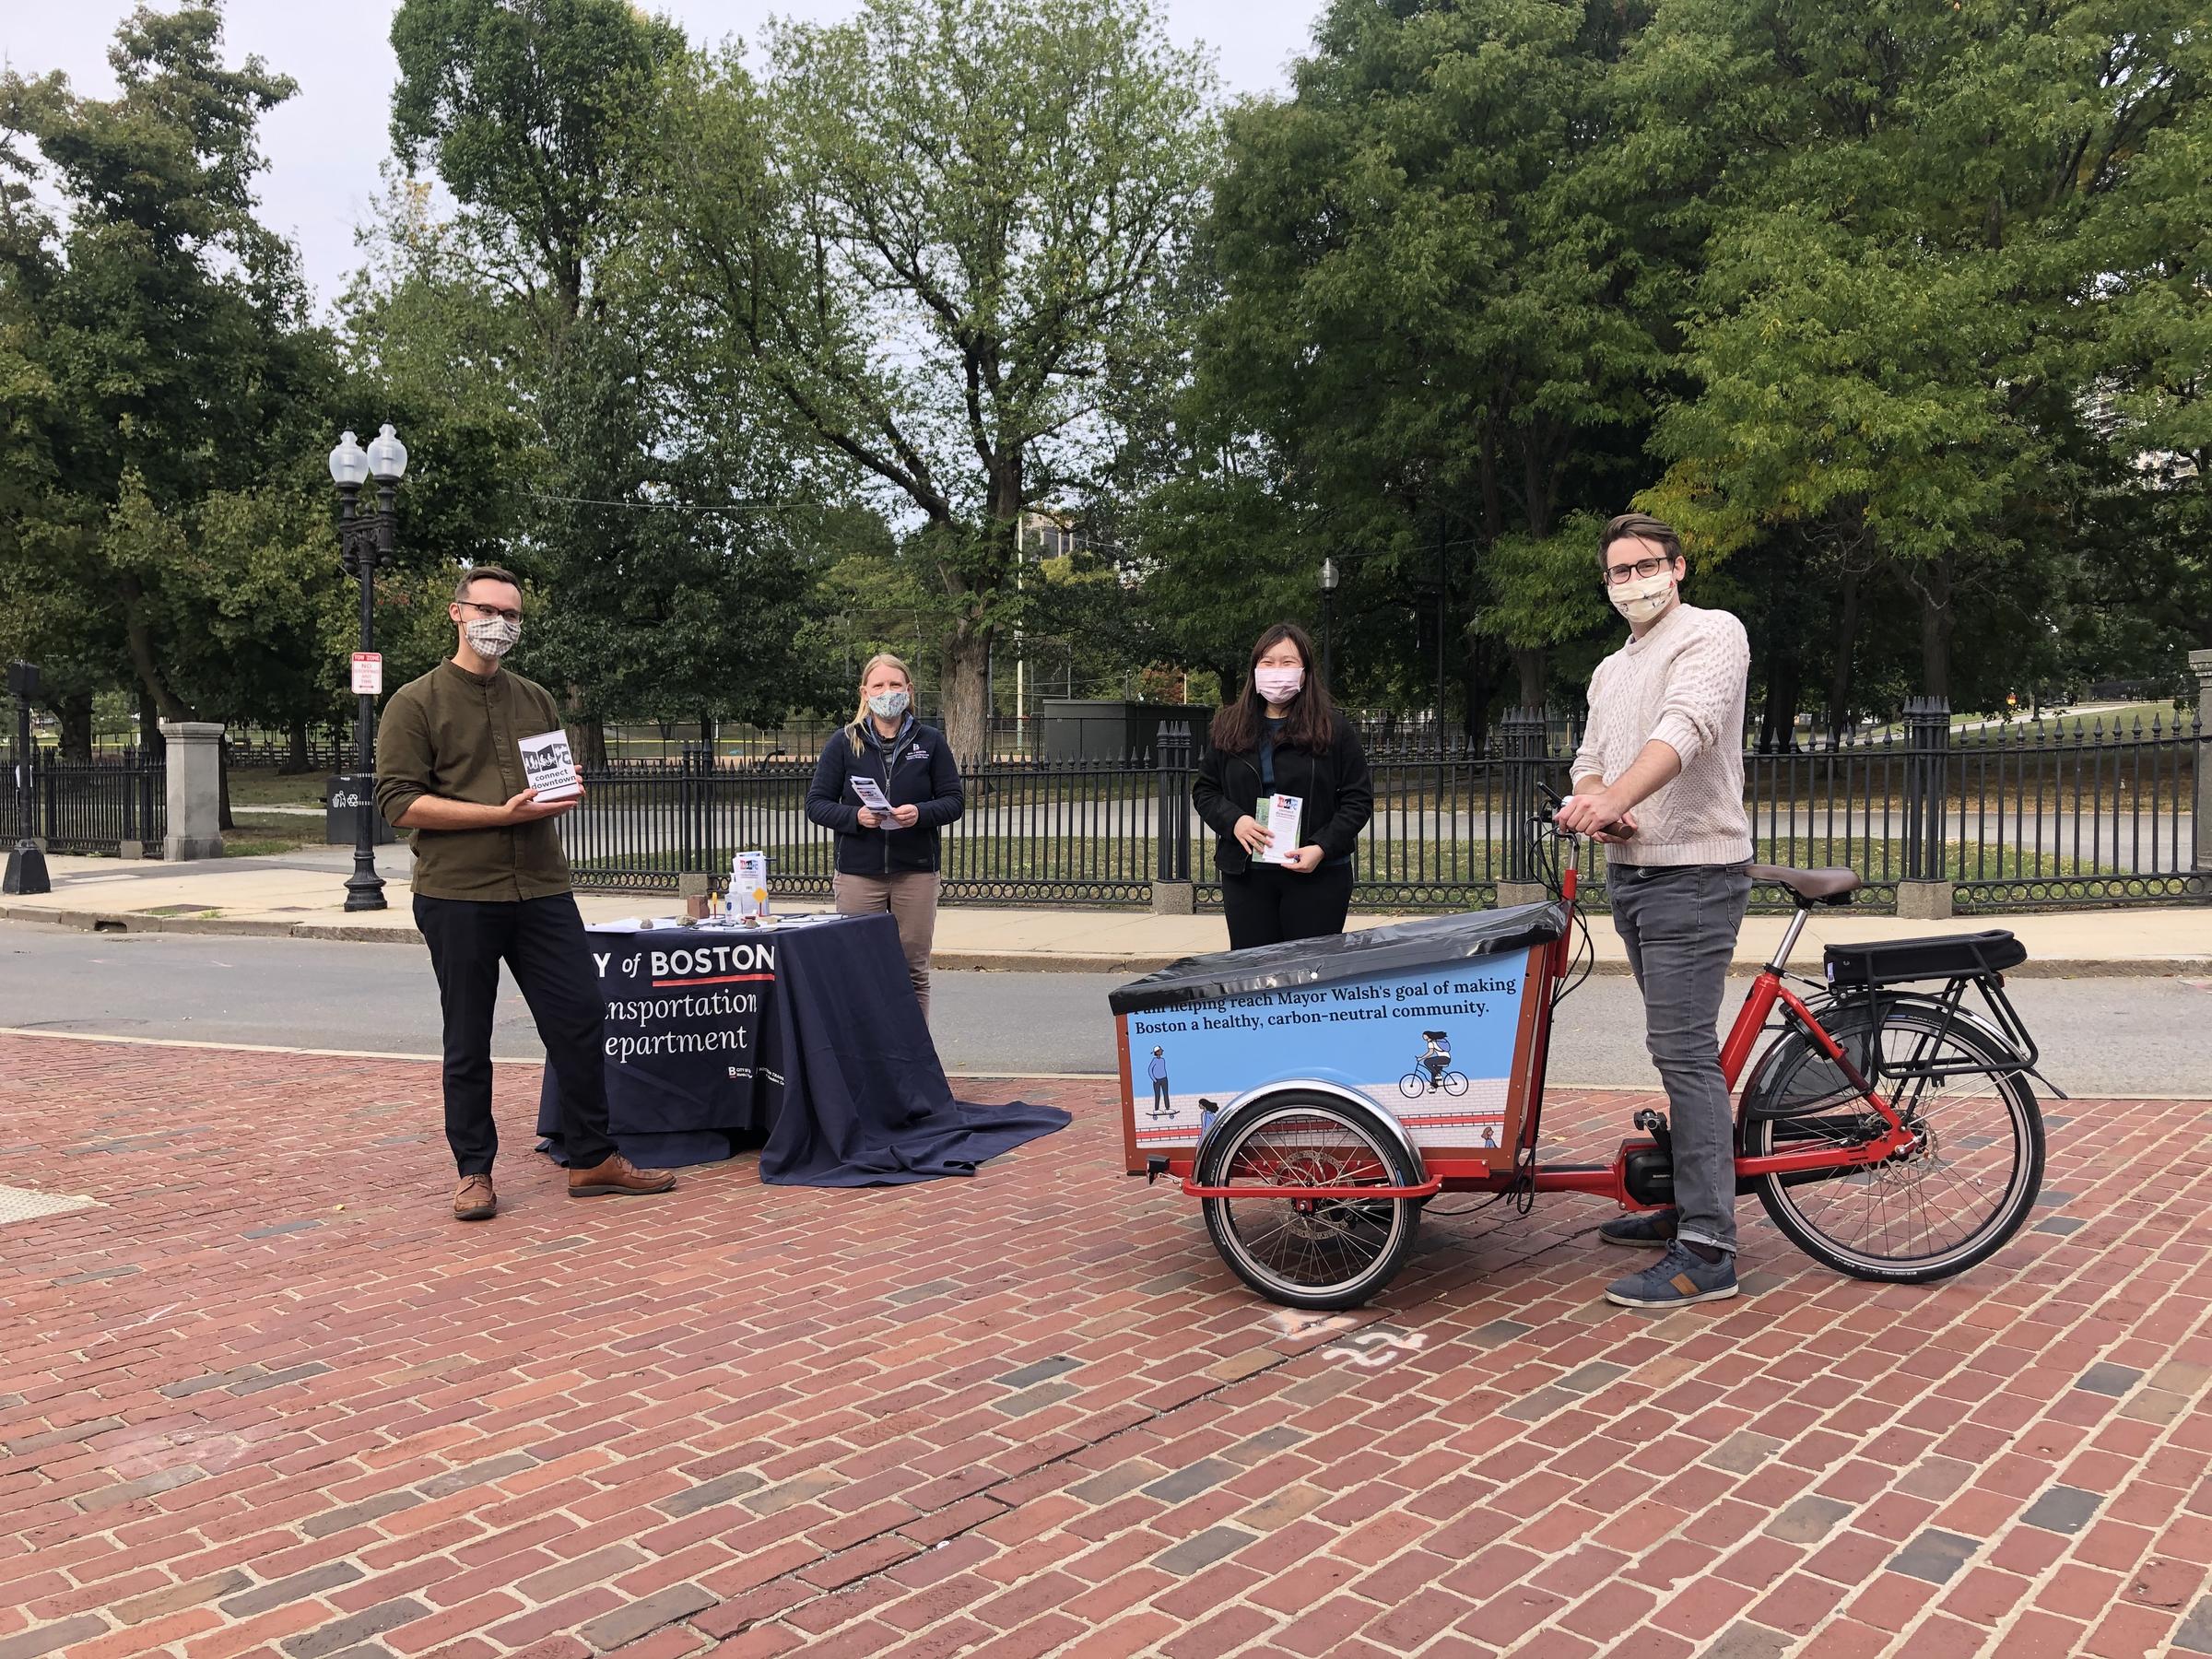 Four people wearing face coverings stand outside on a traffic island. Three people are holding brochures. A table has more materials and is covered with a blue tablecloth that says City of Boston Transportation department. One person stands near a cargo bike.